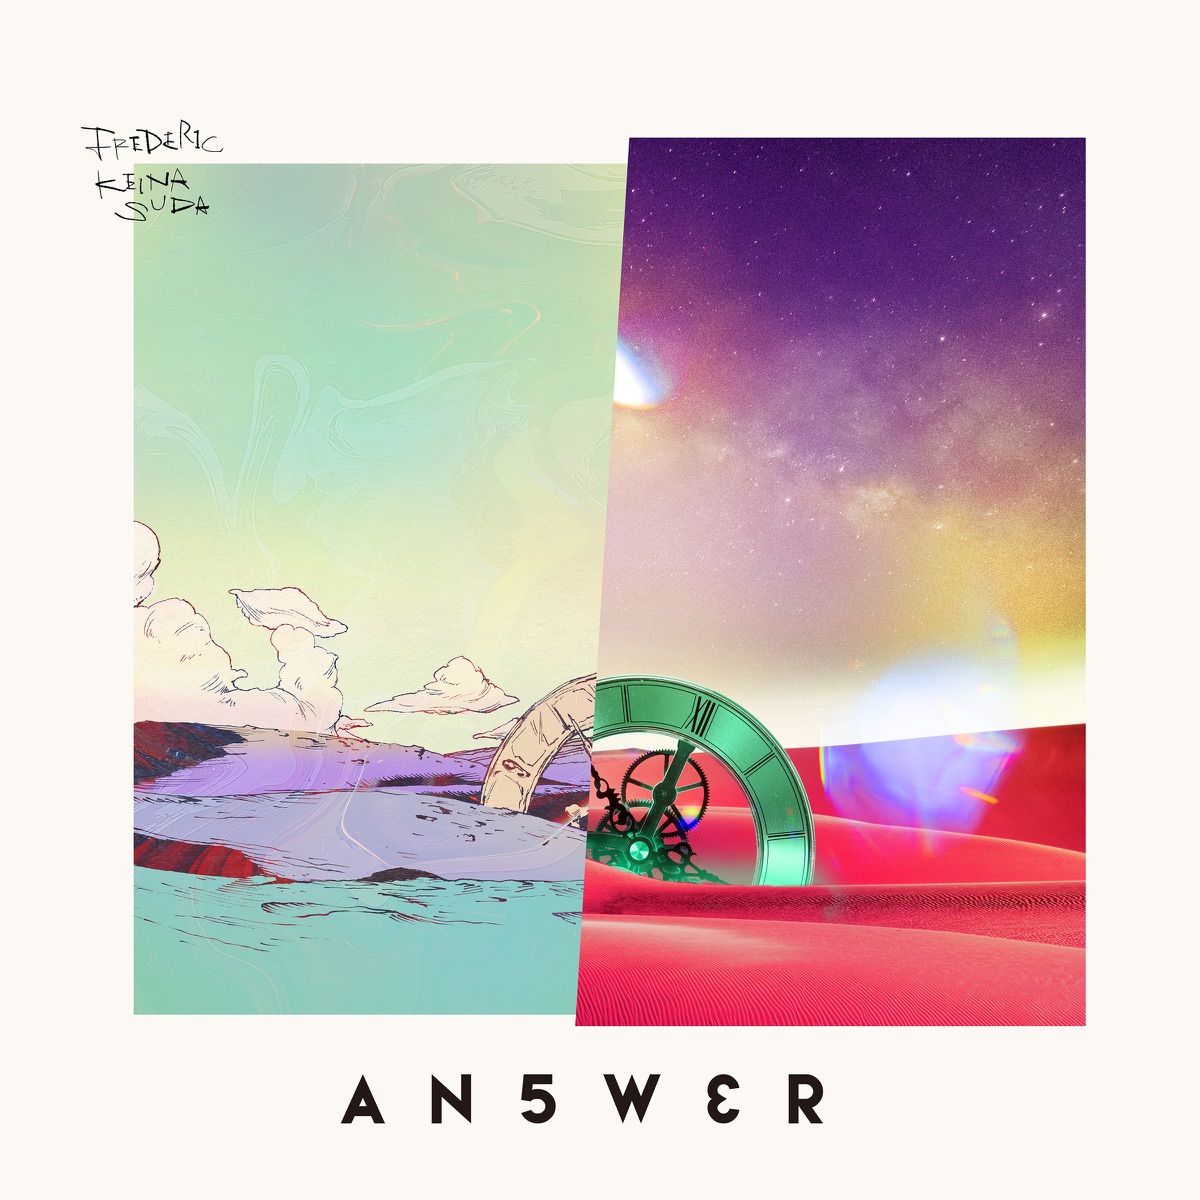 Cover for『Frederic - veil』from the release『ANSWER』